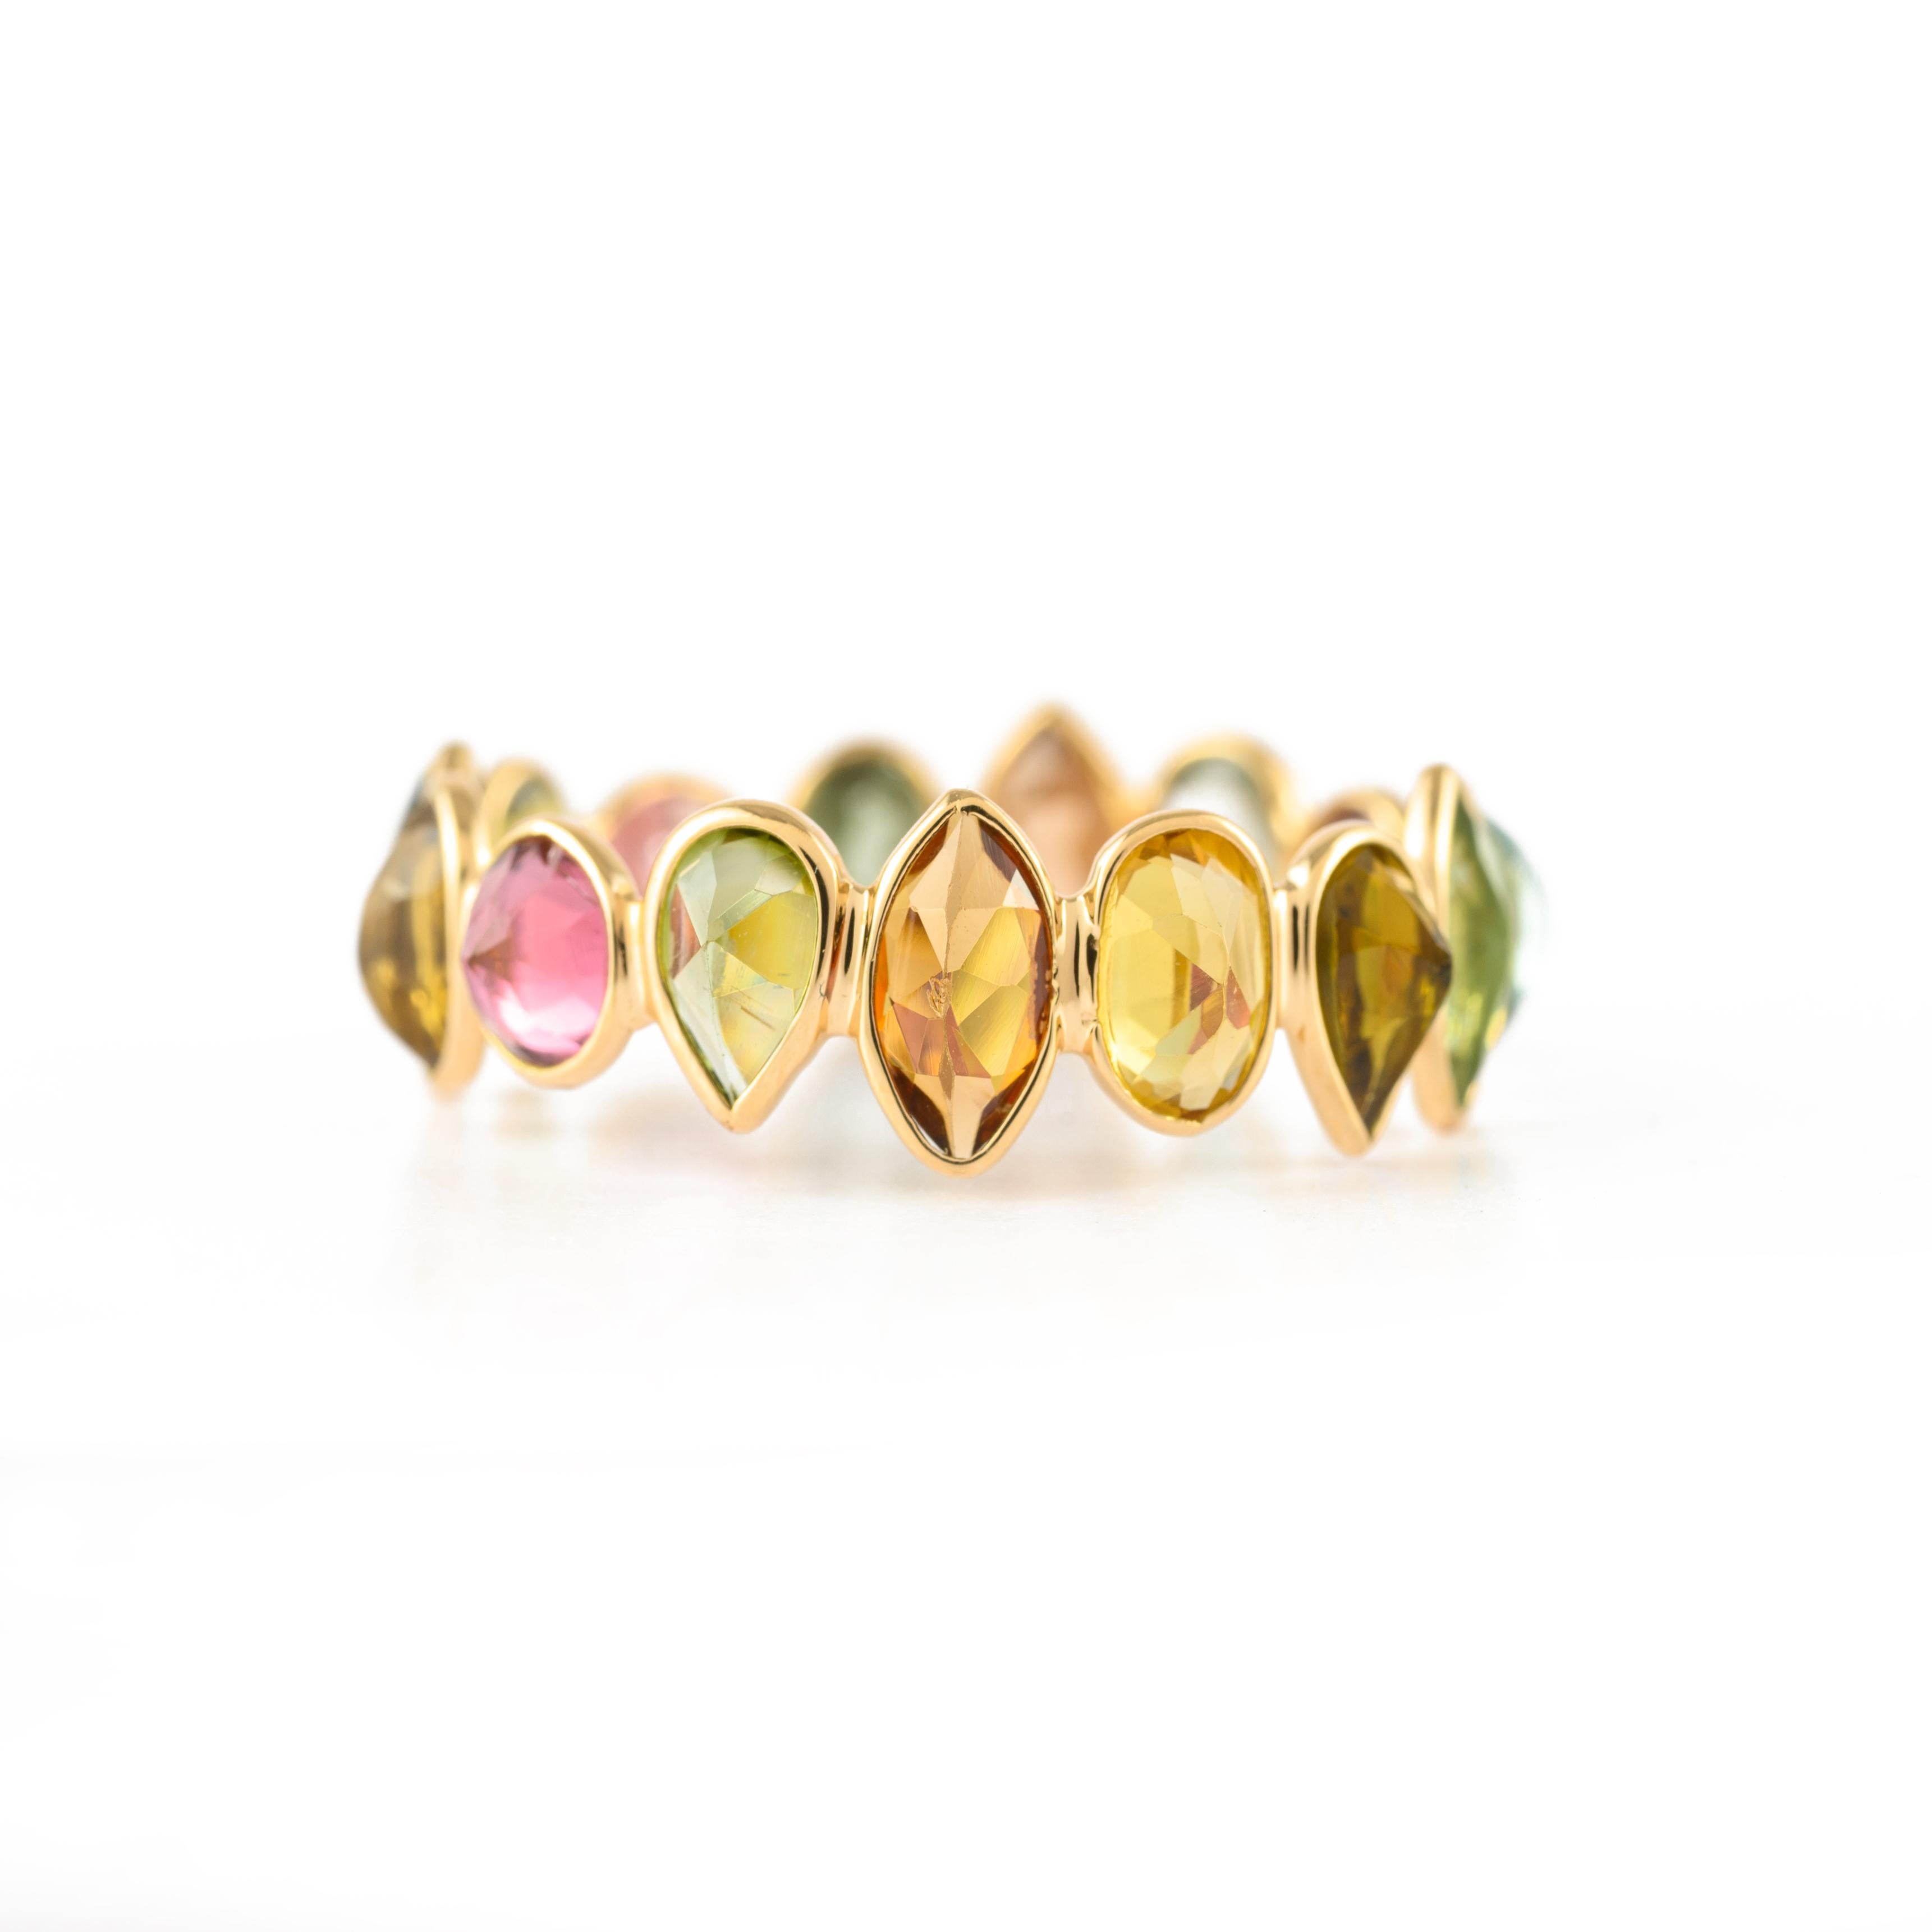 For Sale:  Elegant 3.64ct Multi Tourmaline Full Eternity Band Ring in 18k Solid Yellow Gold 4